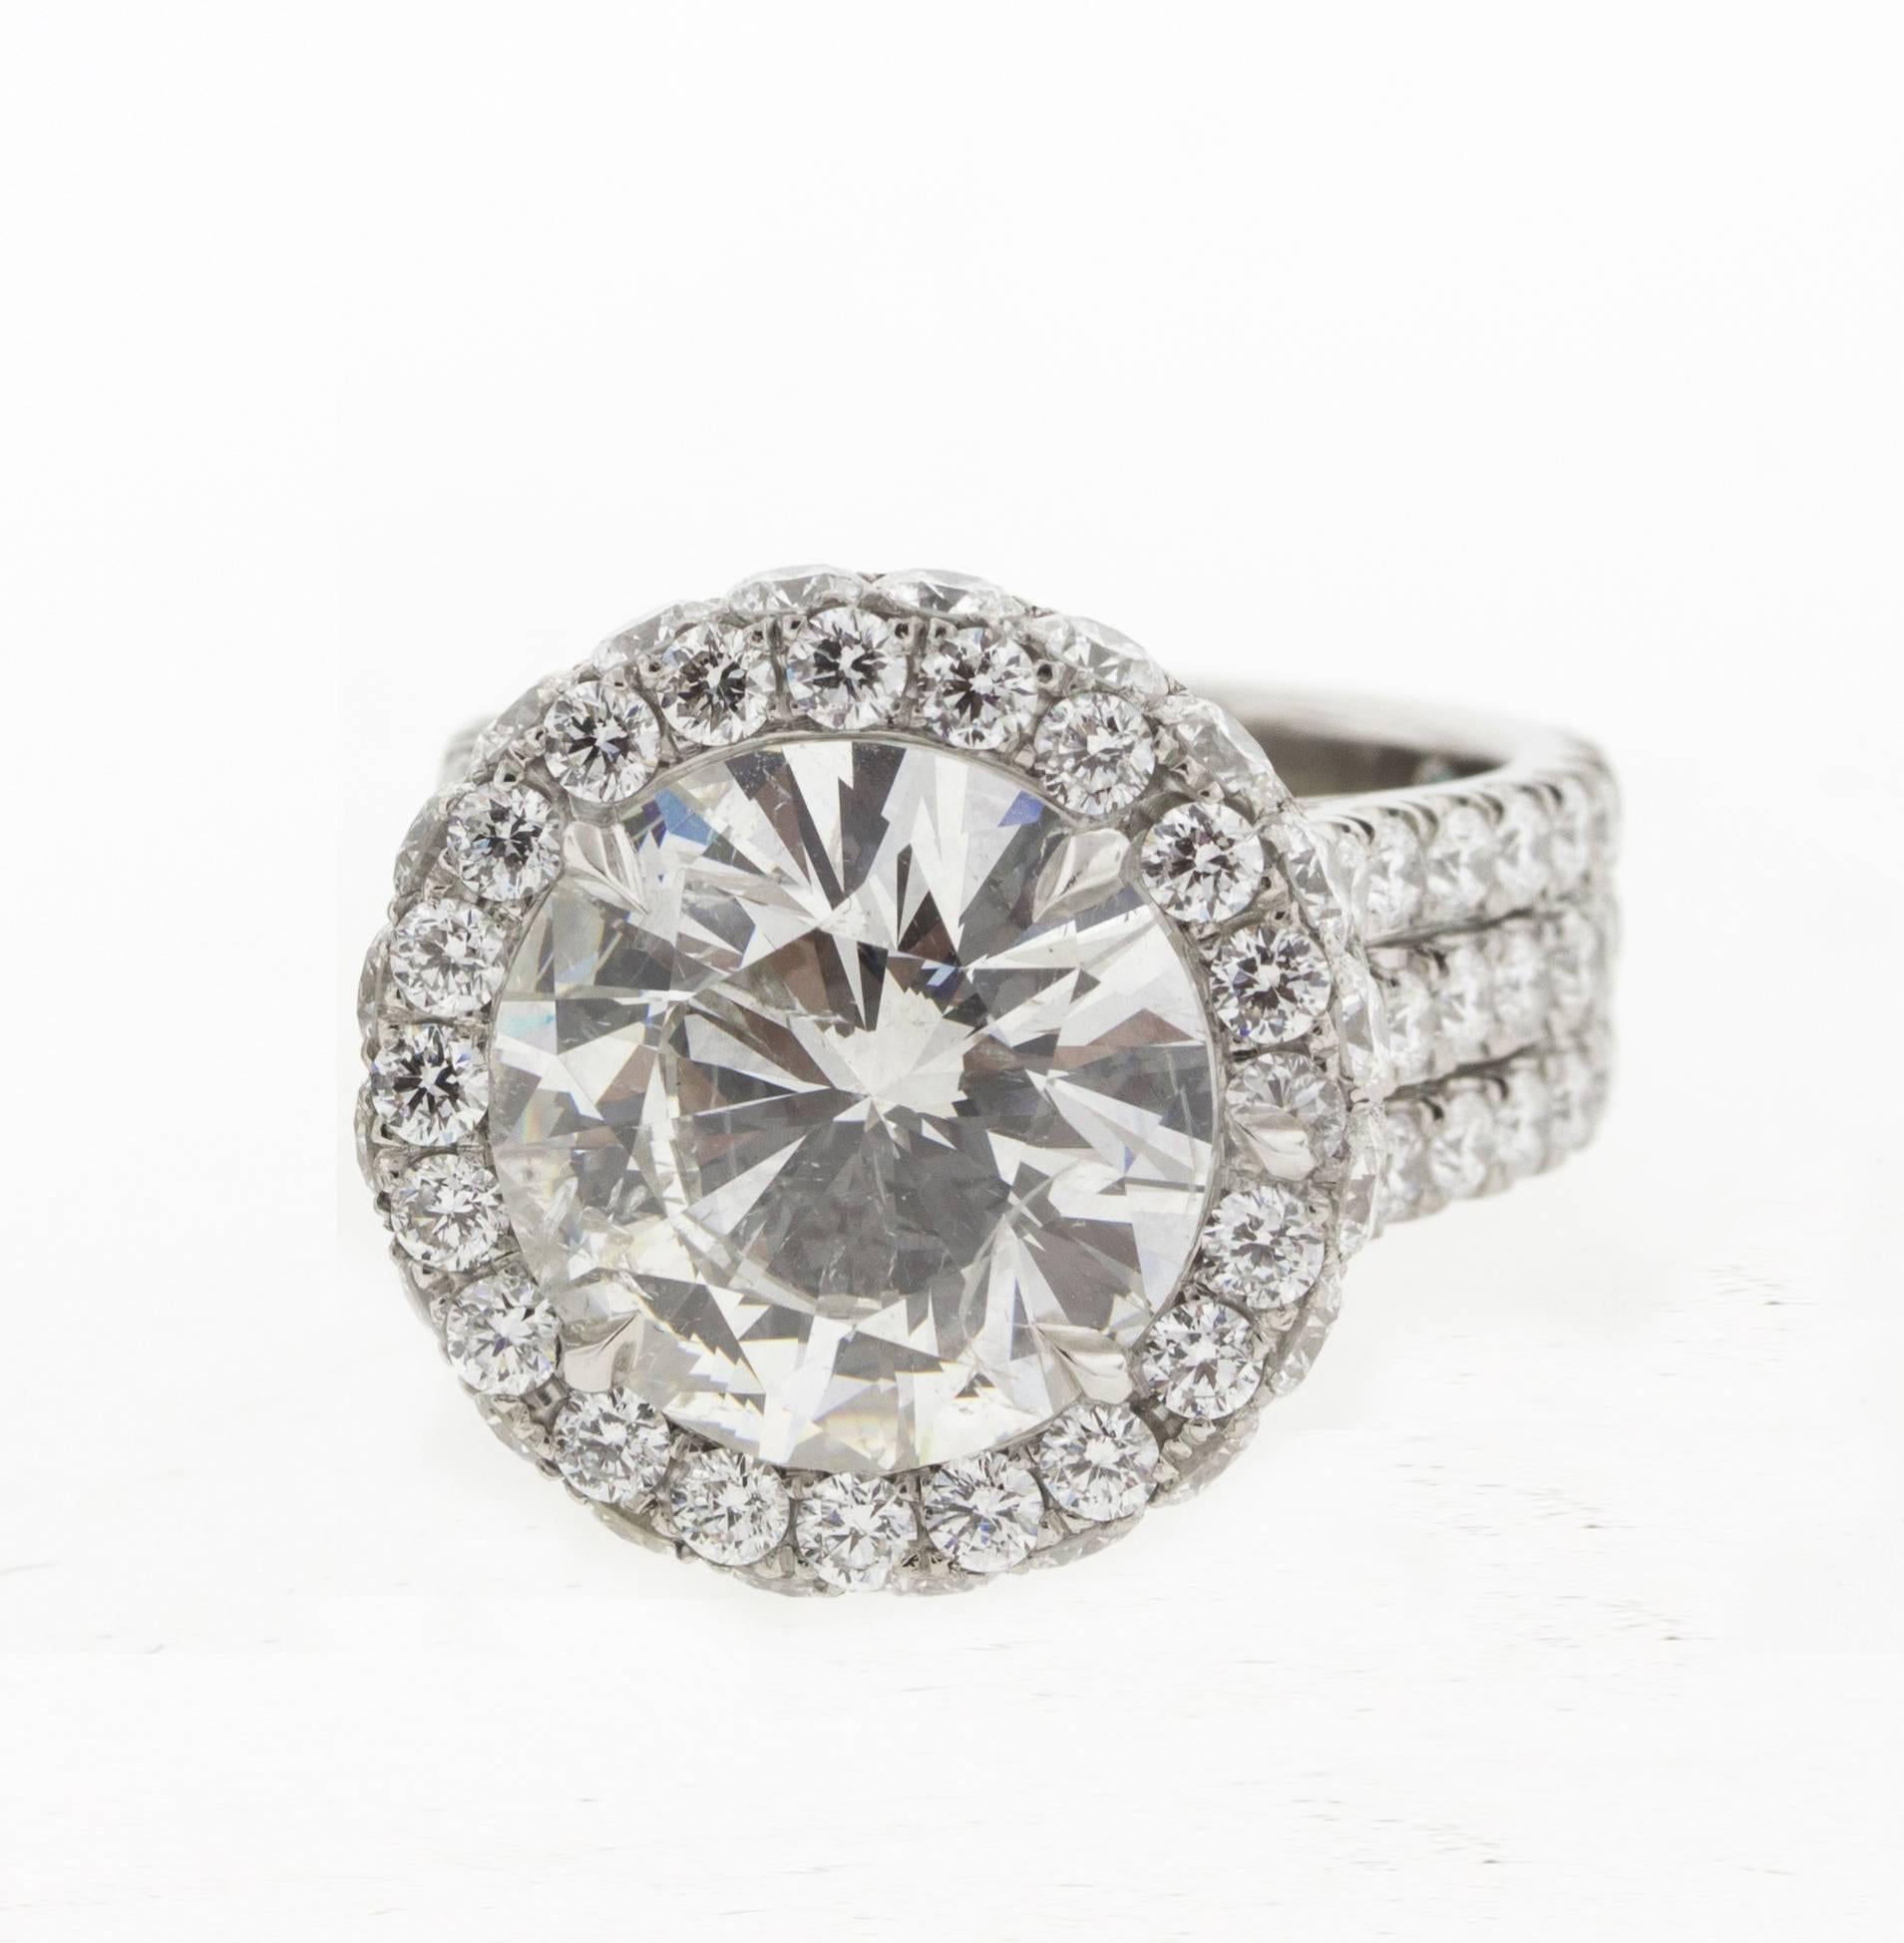 The center stone on this incredible 5 carat custom diamond ring is a sight to behold. An F color and a perfect round brilliant cut, the sheer size of this diamond mandated a custom setting be created with three shanks instead of the normal one or